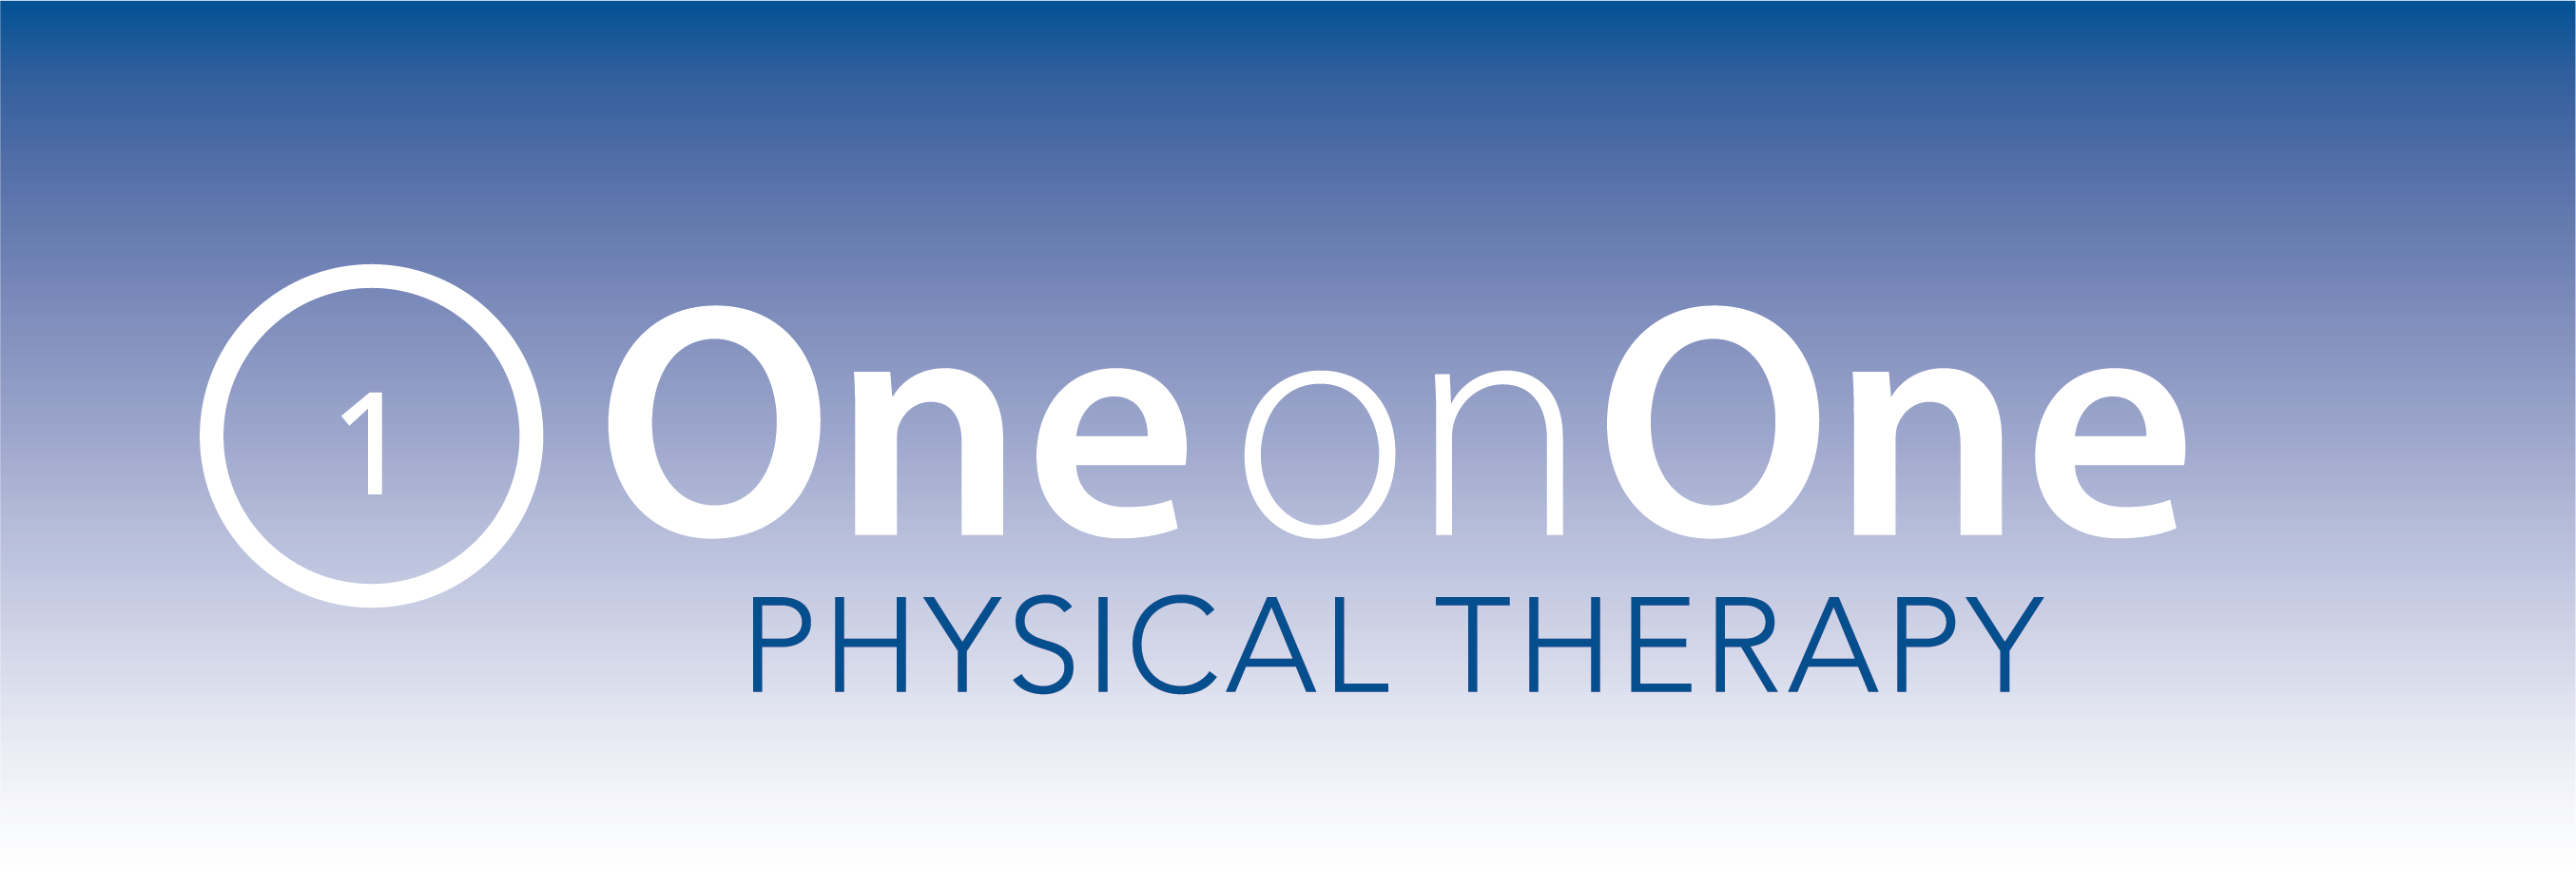 One on One Physical Therapy Pilates Northeast Northeast